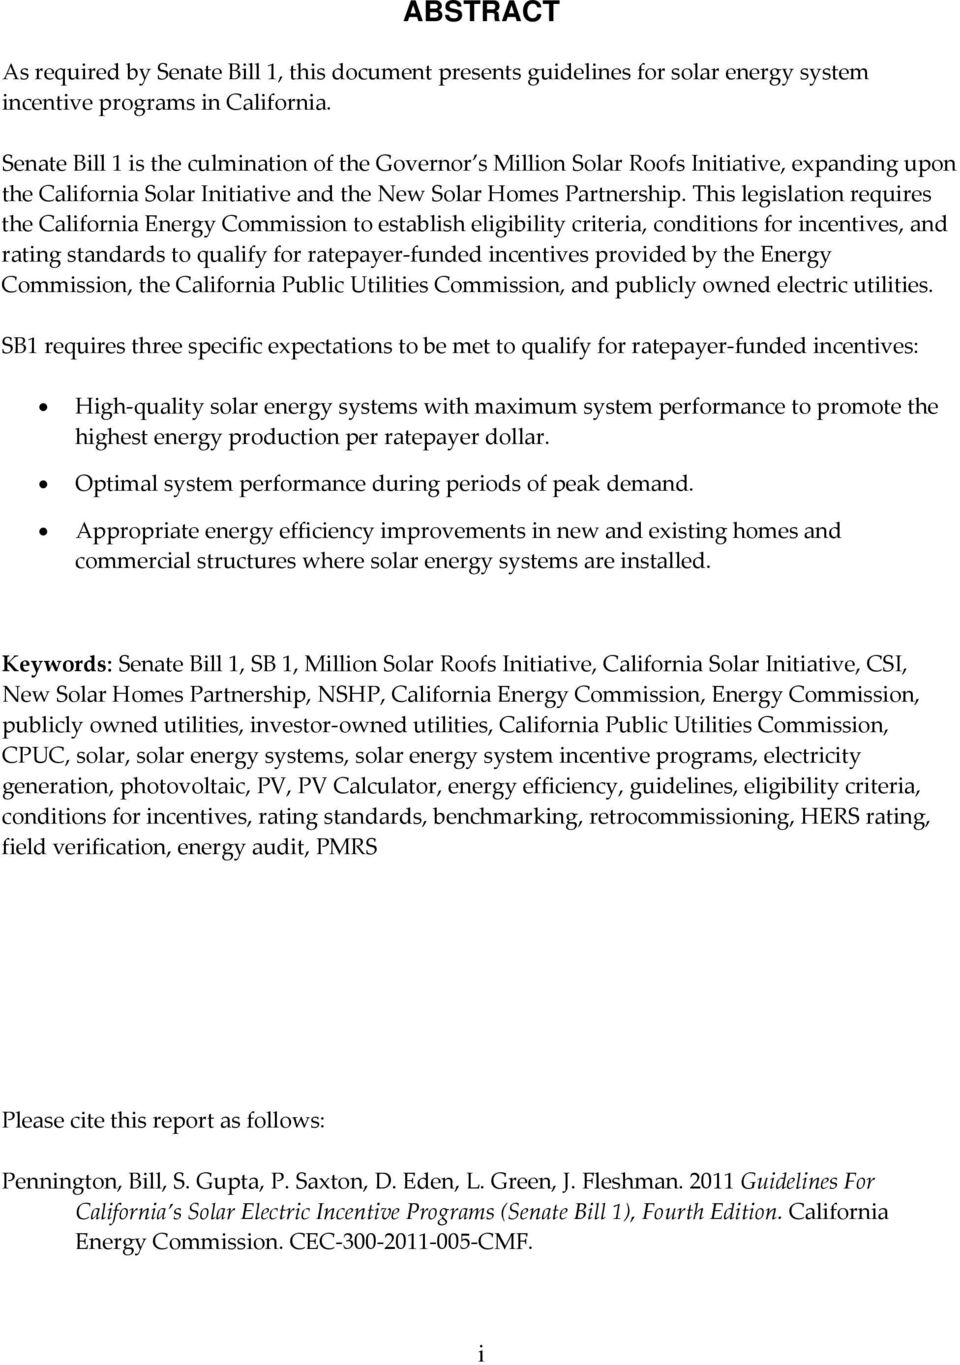 This legislation requires the California Energy Commission to establish eligibility criteria, conditions for incentives, and rating standards to qualify for ratepayer funded incentives provided by